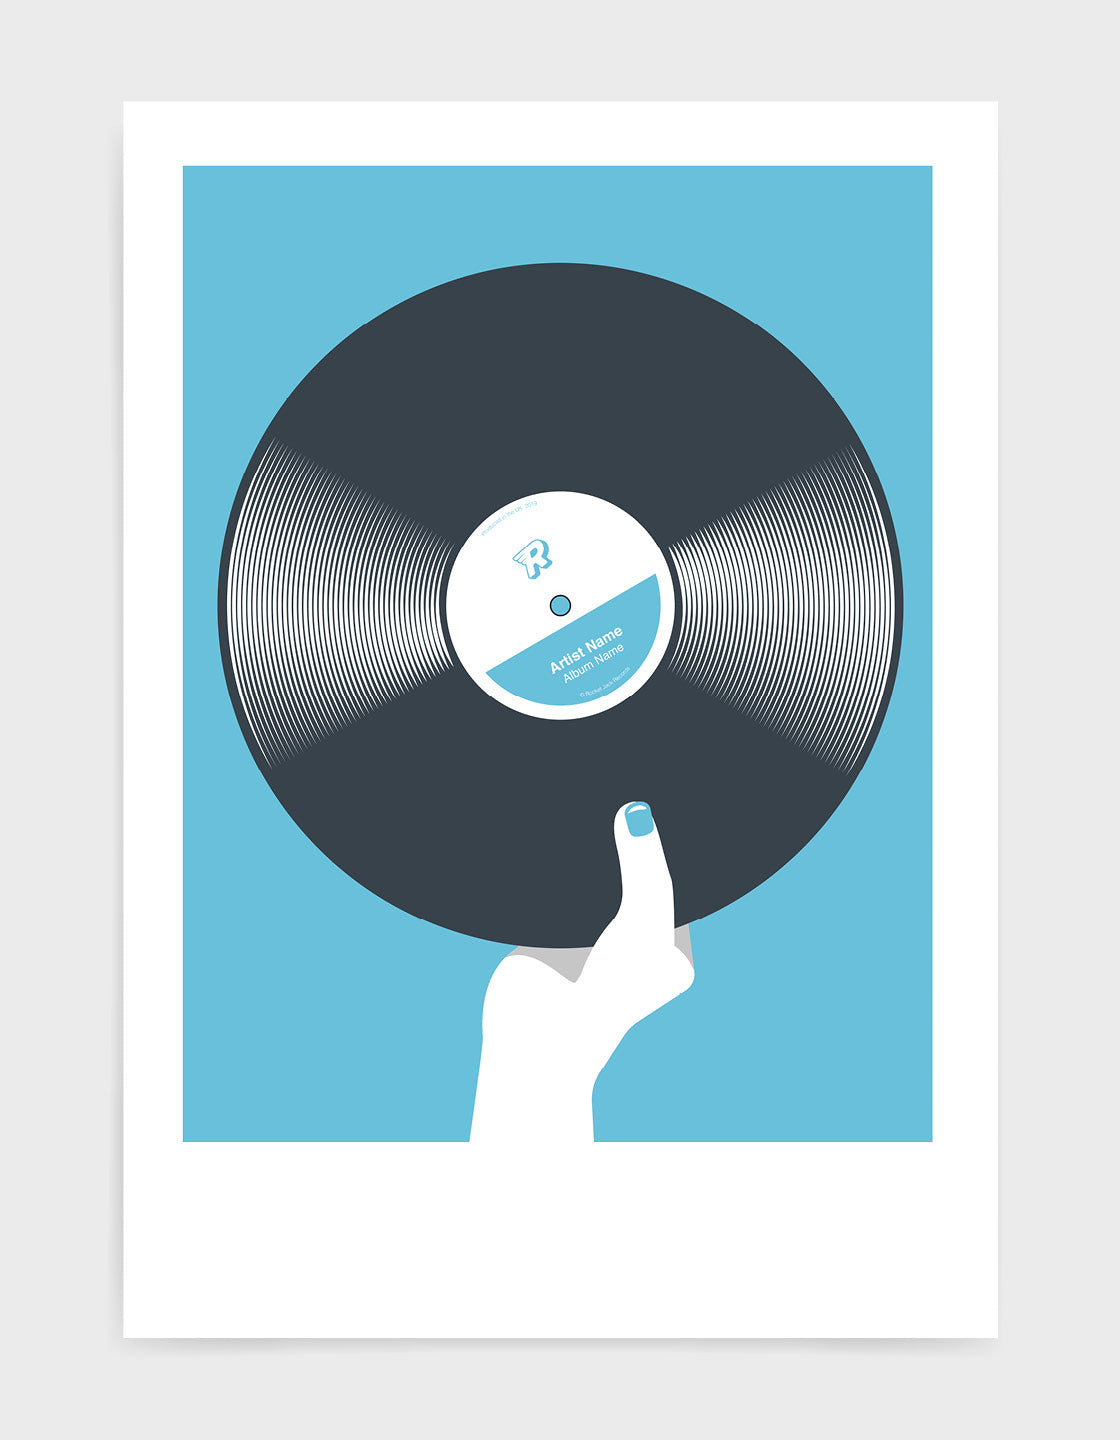 art print image of a Personalised black vinyl record held in a hand with red nails against a light blue background